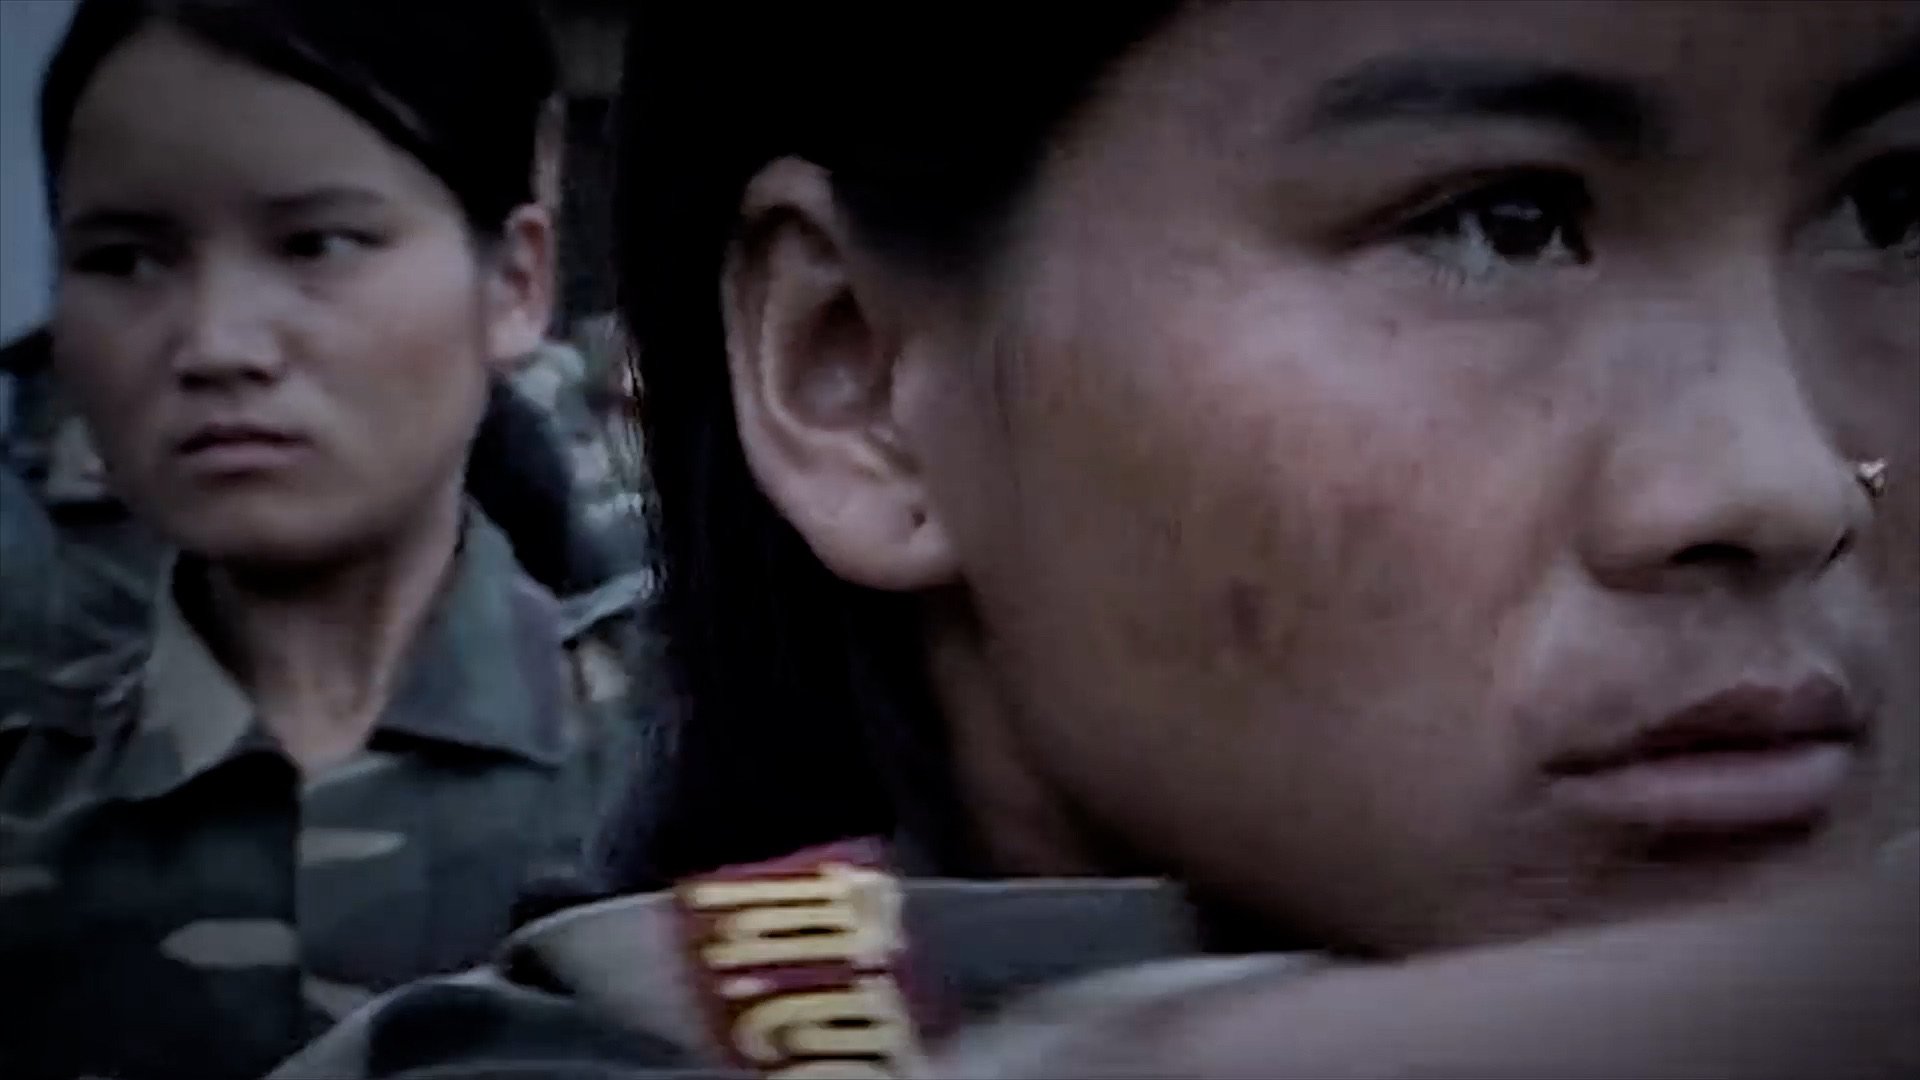 Archive of female fighters in Nepal's Civil War - some never seen before - is throughout our documentary.
After Devi was raped in custody by the police, she contemplated taking her own life. But a voice in her told her to fight back and she joined th